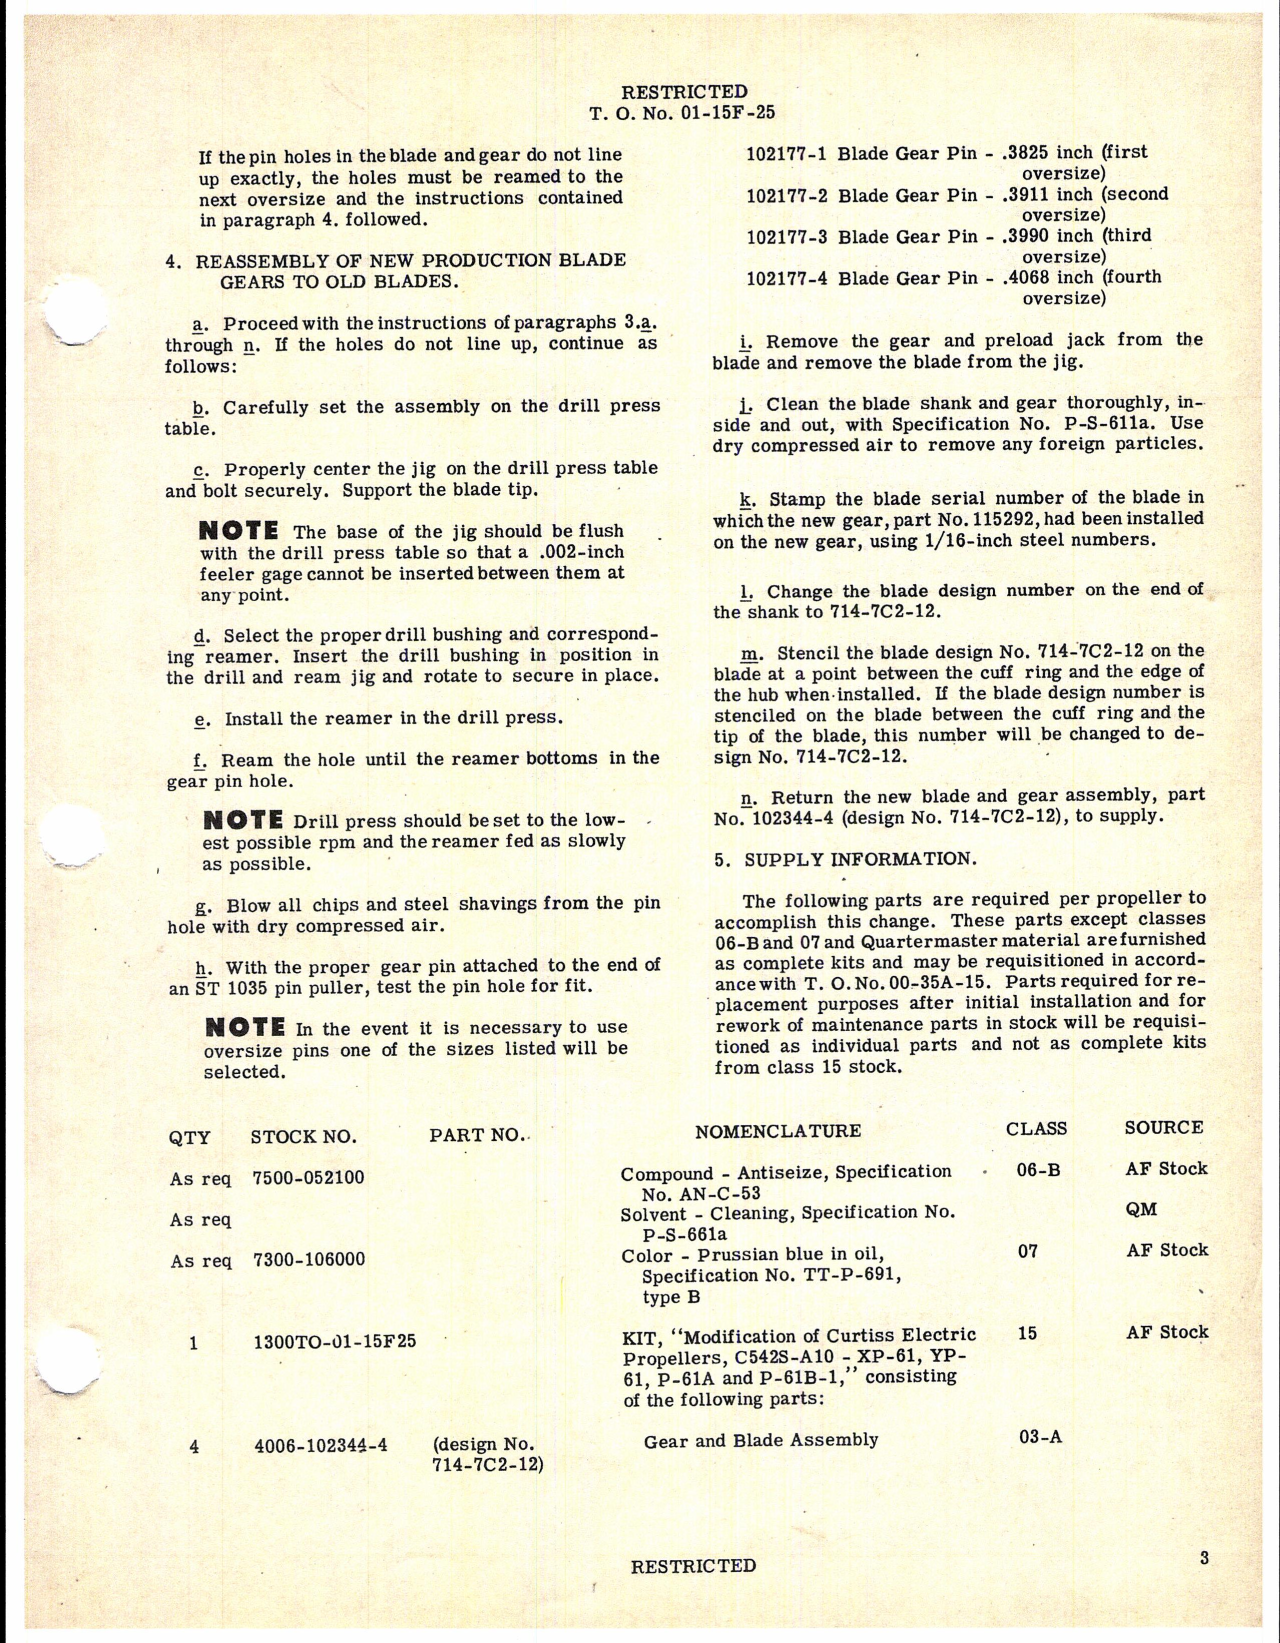 Sample page 3 from AirCorps Library document: Modification of Curtiss Electric Propeller P-61 Series